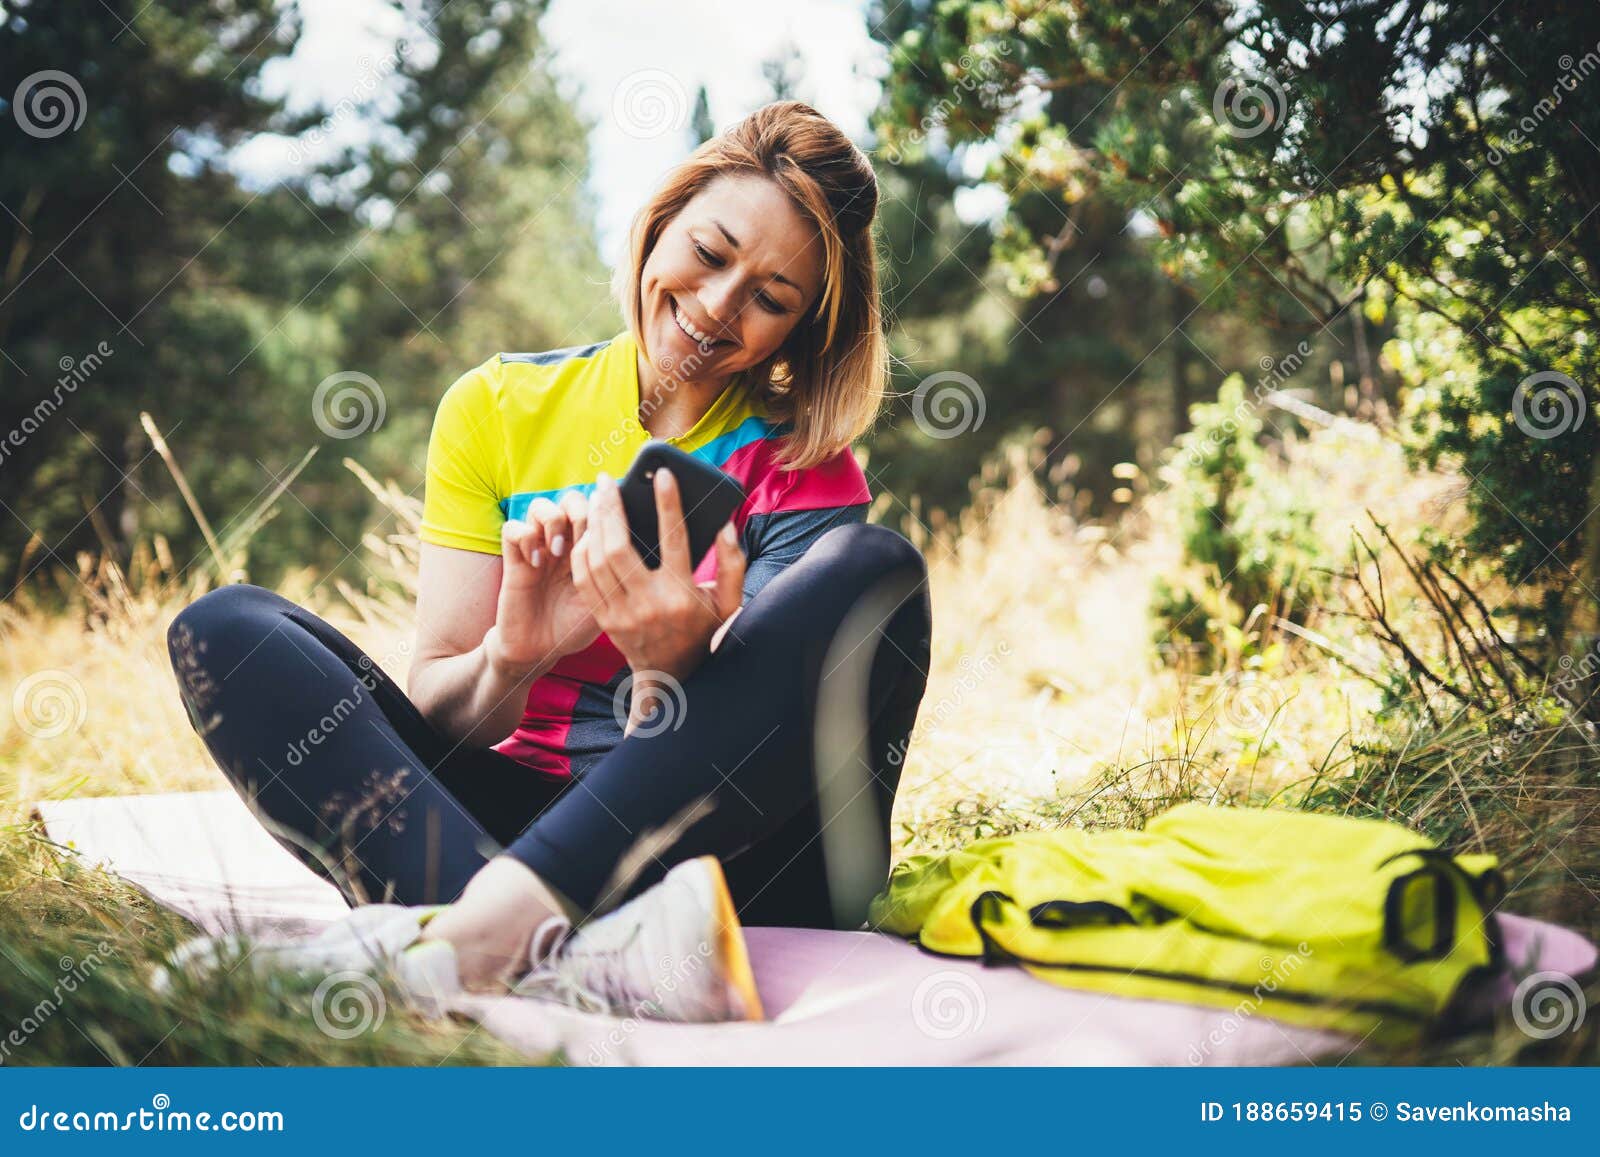 Isolation Girl Laughing Using Smartphone after Training in Park. Smile ...